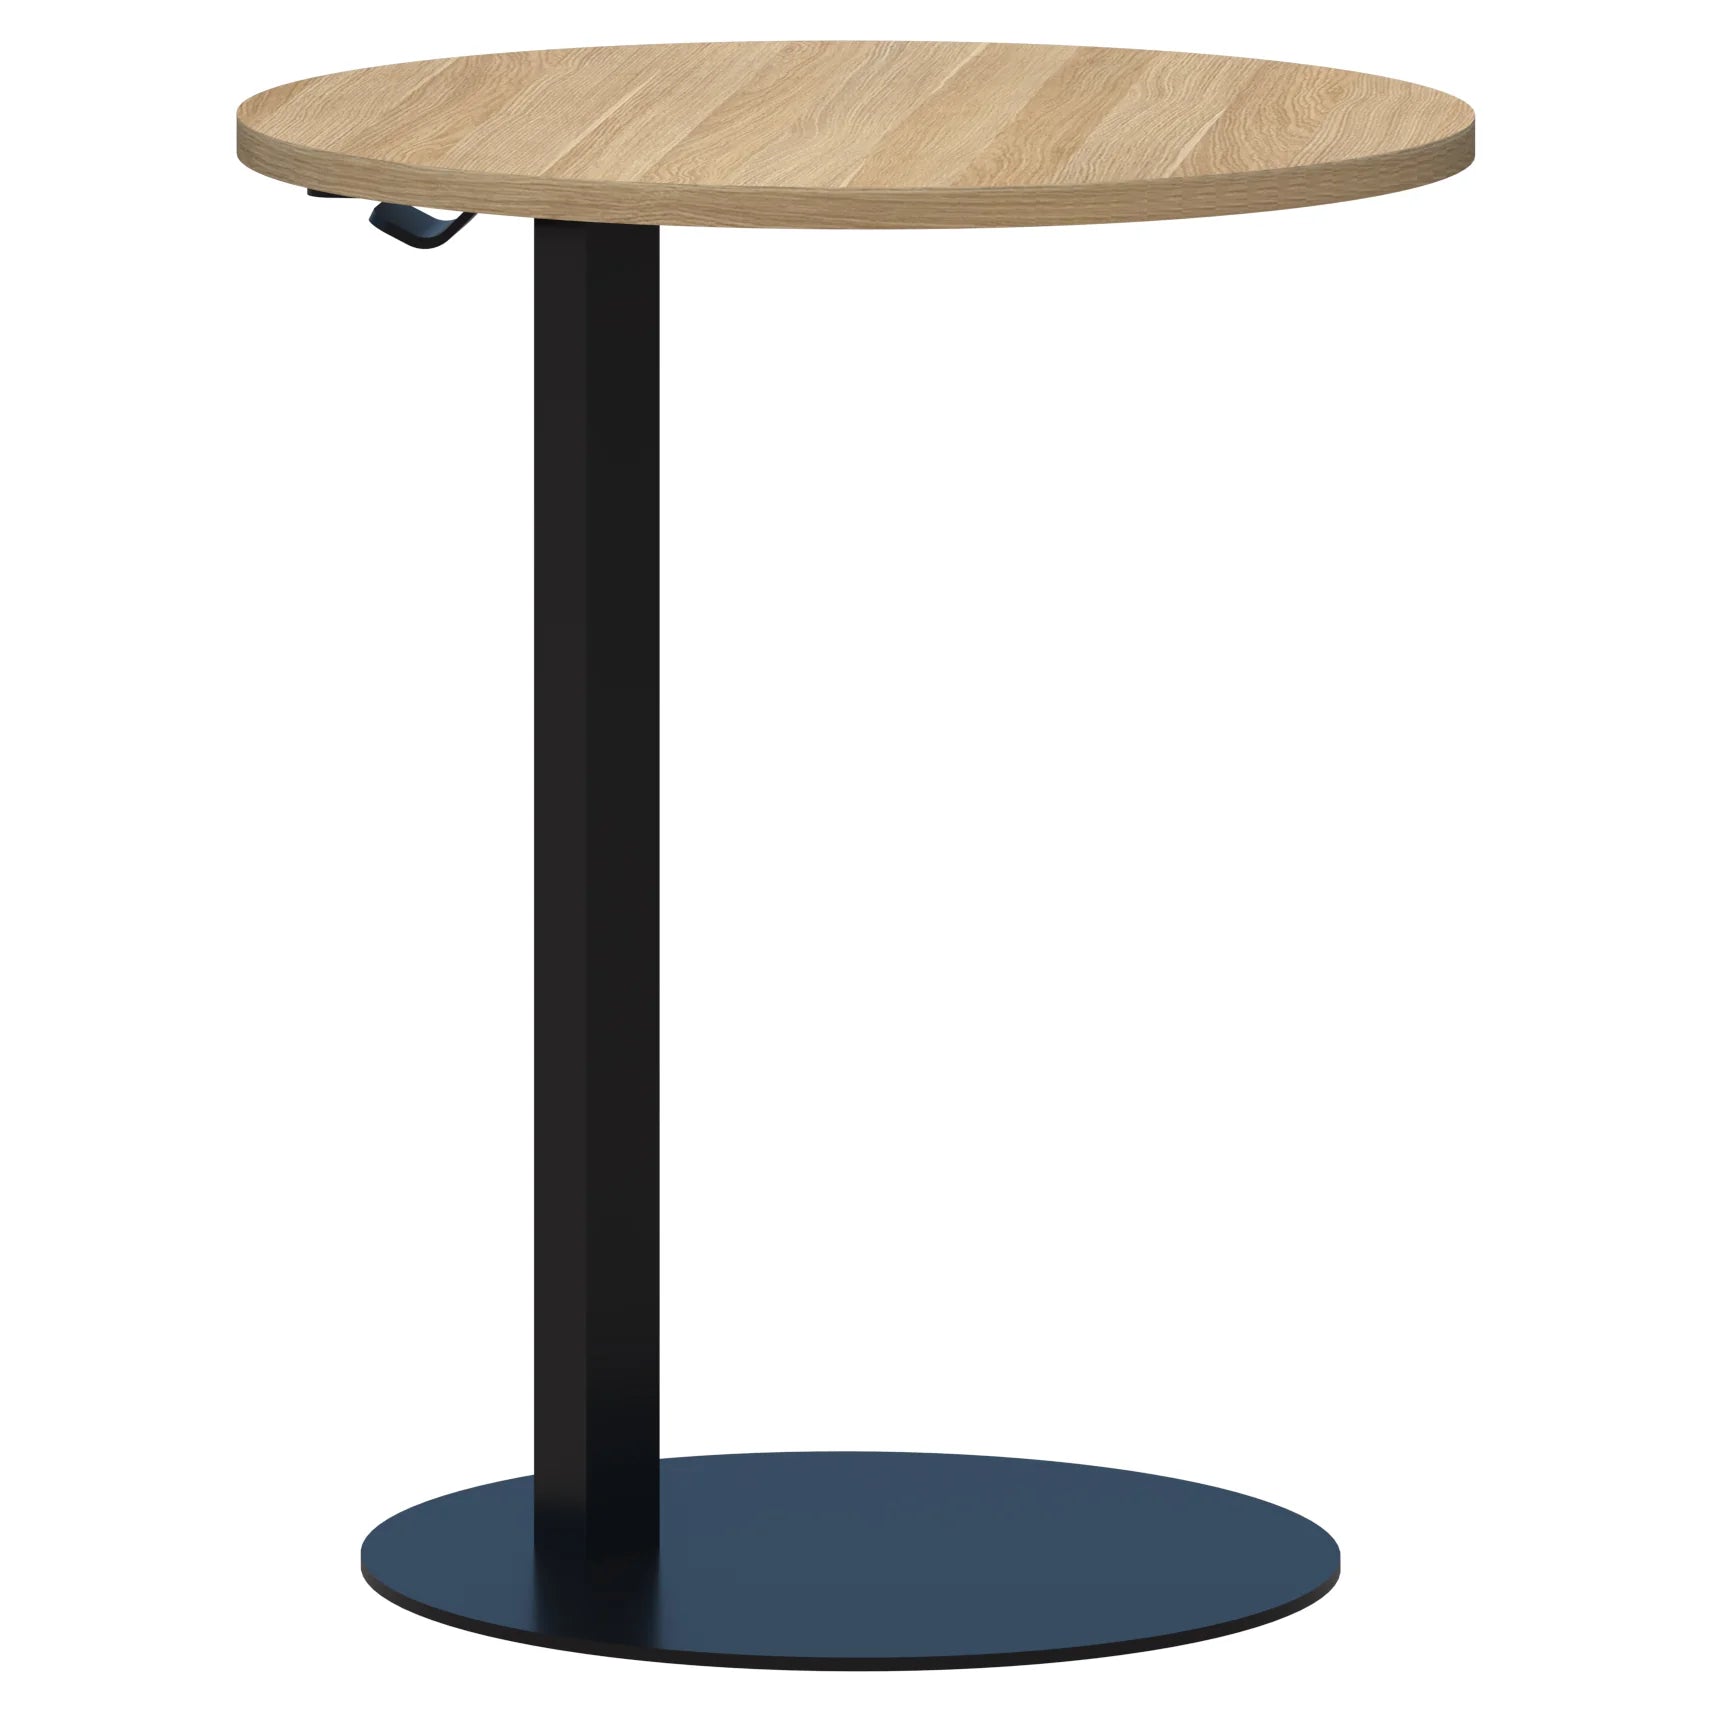 Memo laptop table with round top in classic oak and black pedestal base.